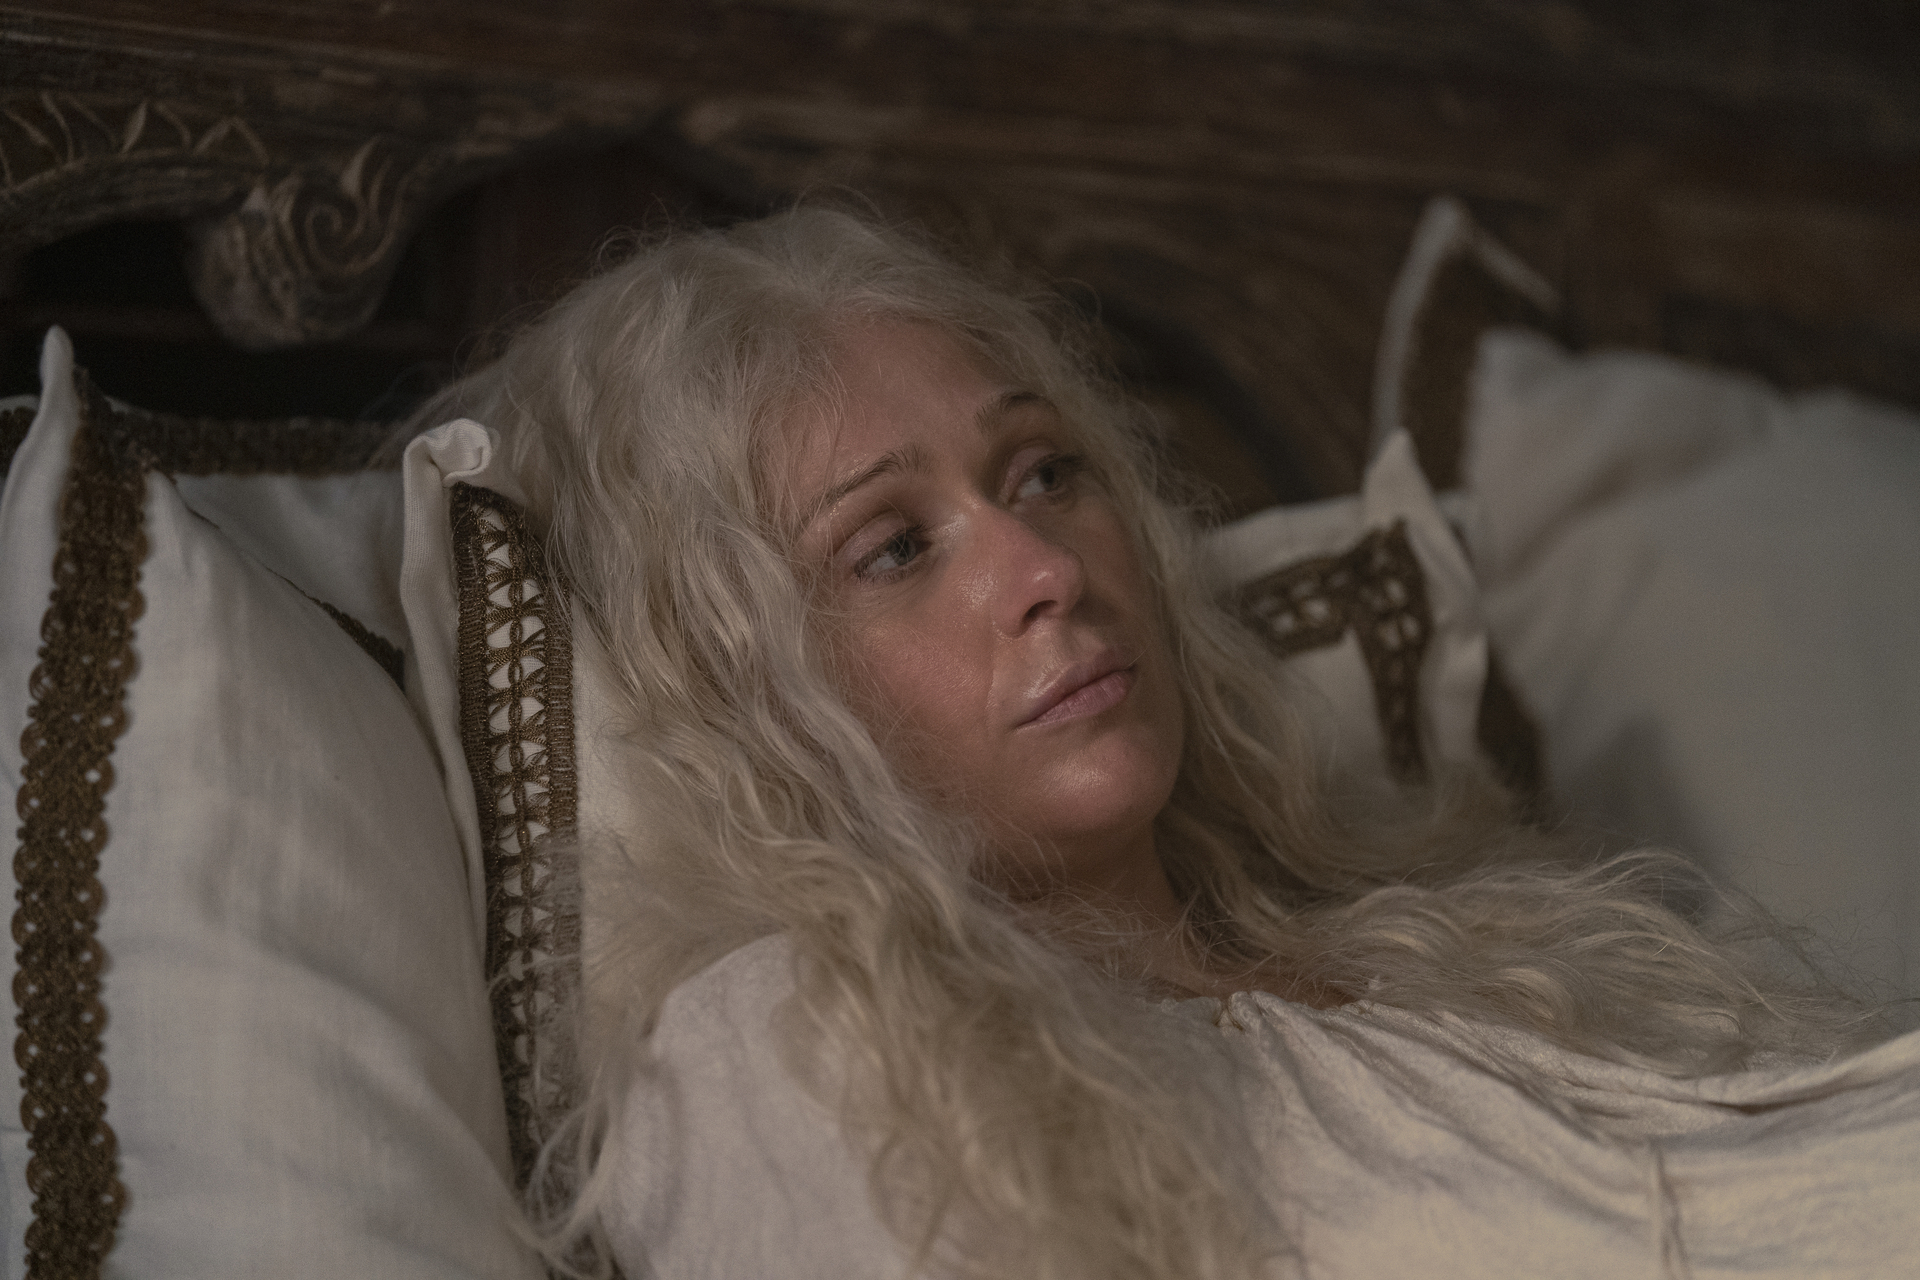 Sian Brooke in House of the Dragon. Image: courtesy of Warner Brothers